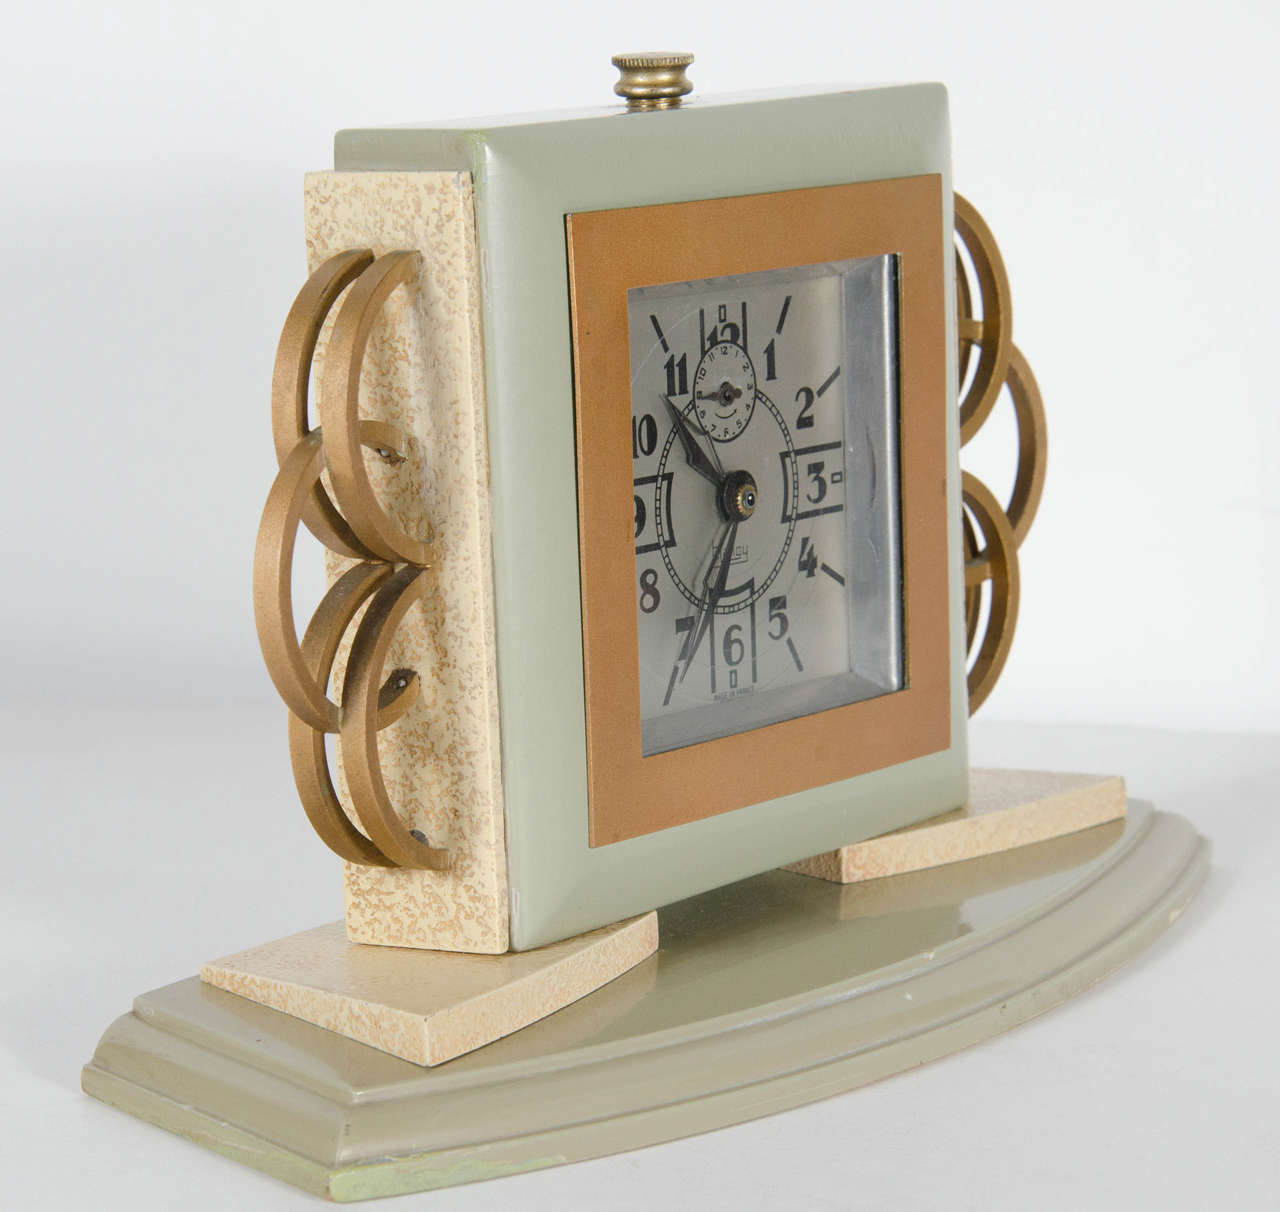 This stunning clock clock features a celadon lacquered base frame and base with gilt concentric ring detailing on the sides and creme accents. Stylized Art Deco numbers and hands in black on a silvered face. The clock has been fitted with a battery